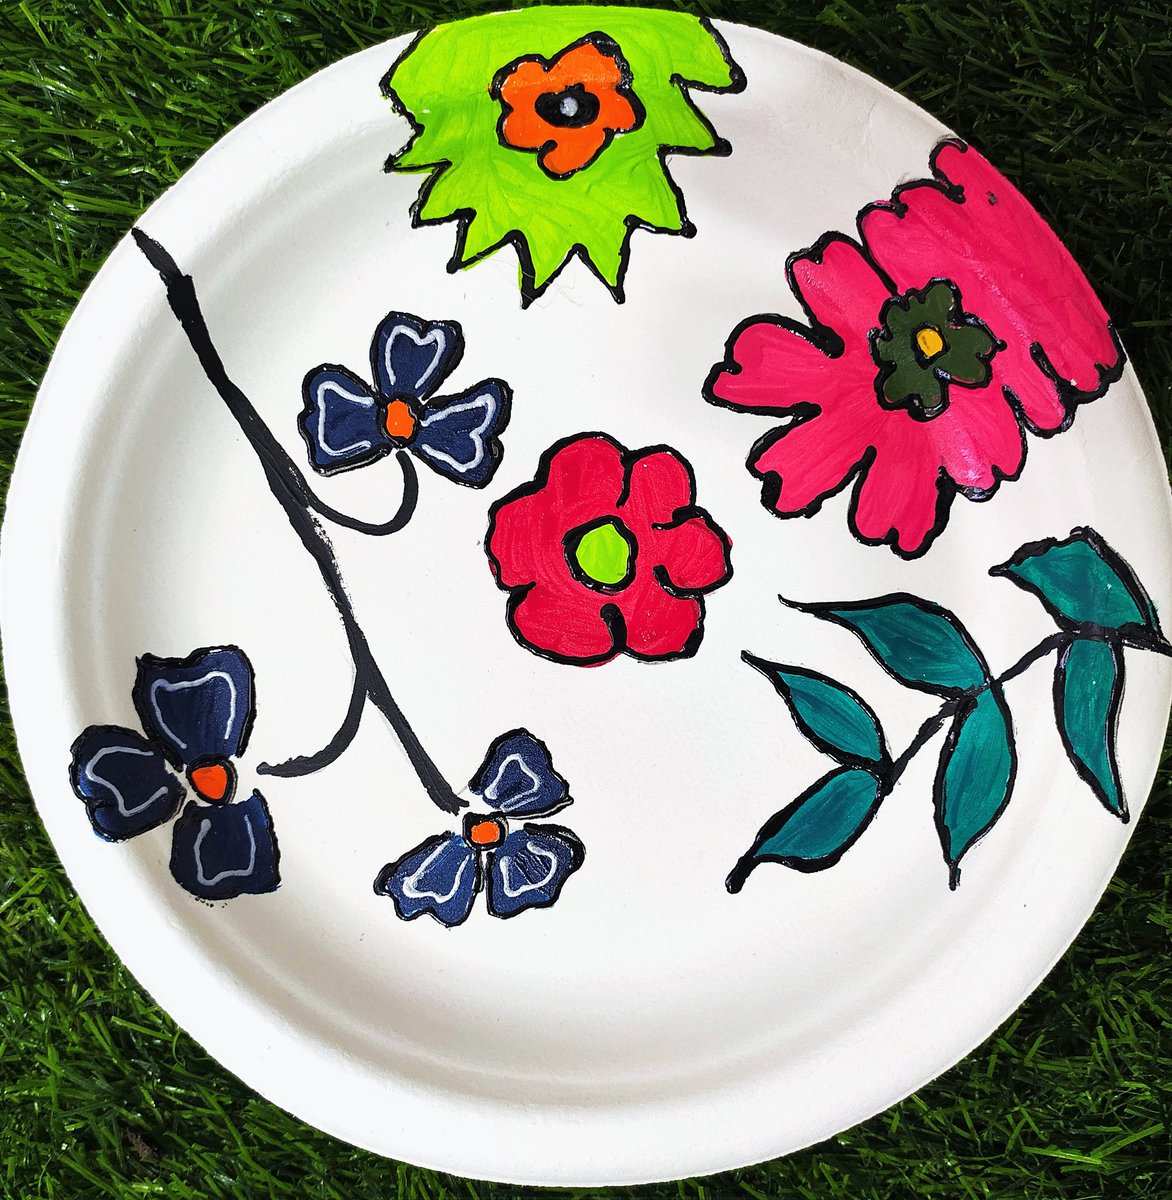 Painting on disposable plates

#art #disposabledishes #paintondisposableplates #disposableplates #paintings #diypainting #art #love #paintinglove 

Subscribe my YouTube channel - bit.ly/2Rx1ini